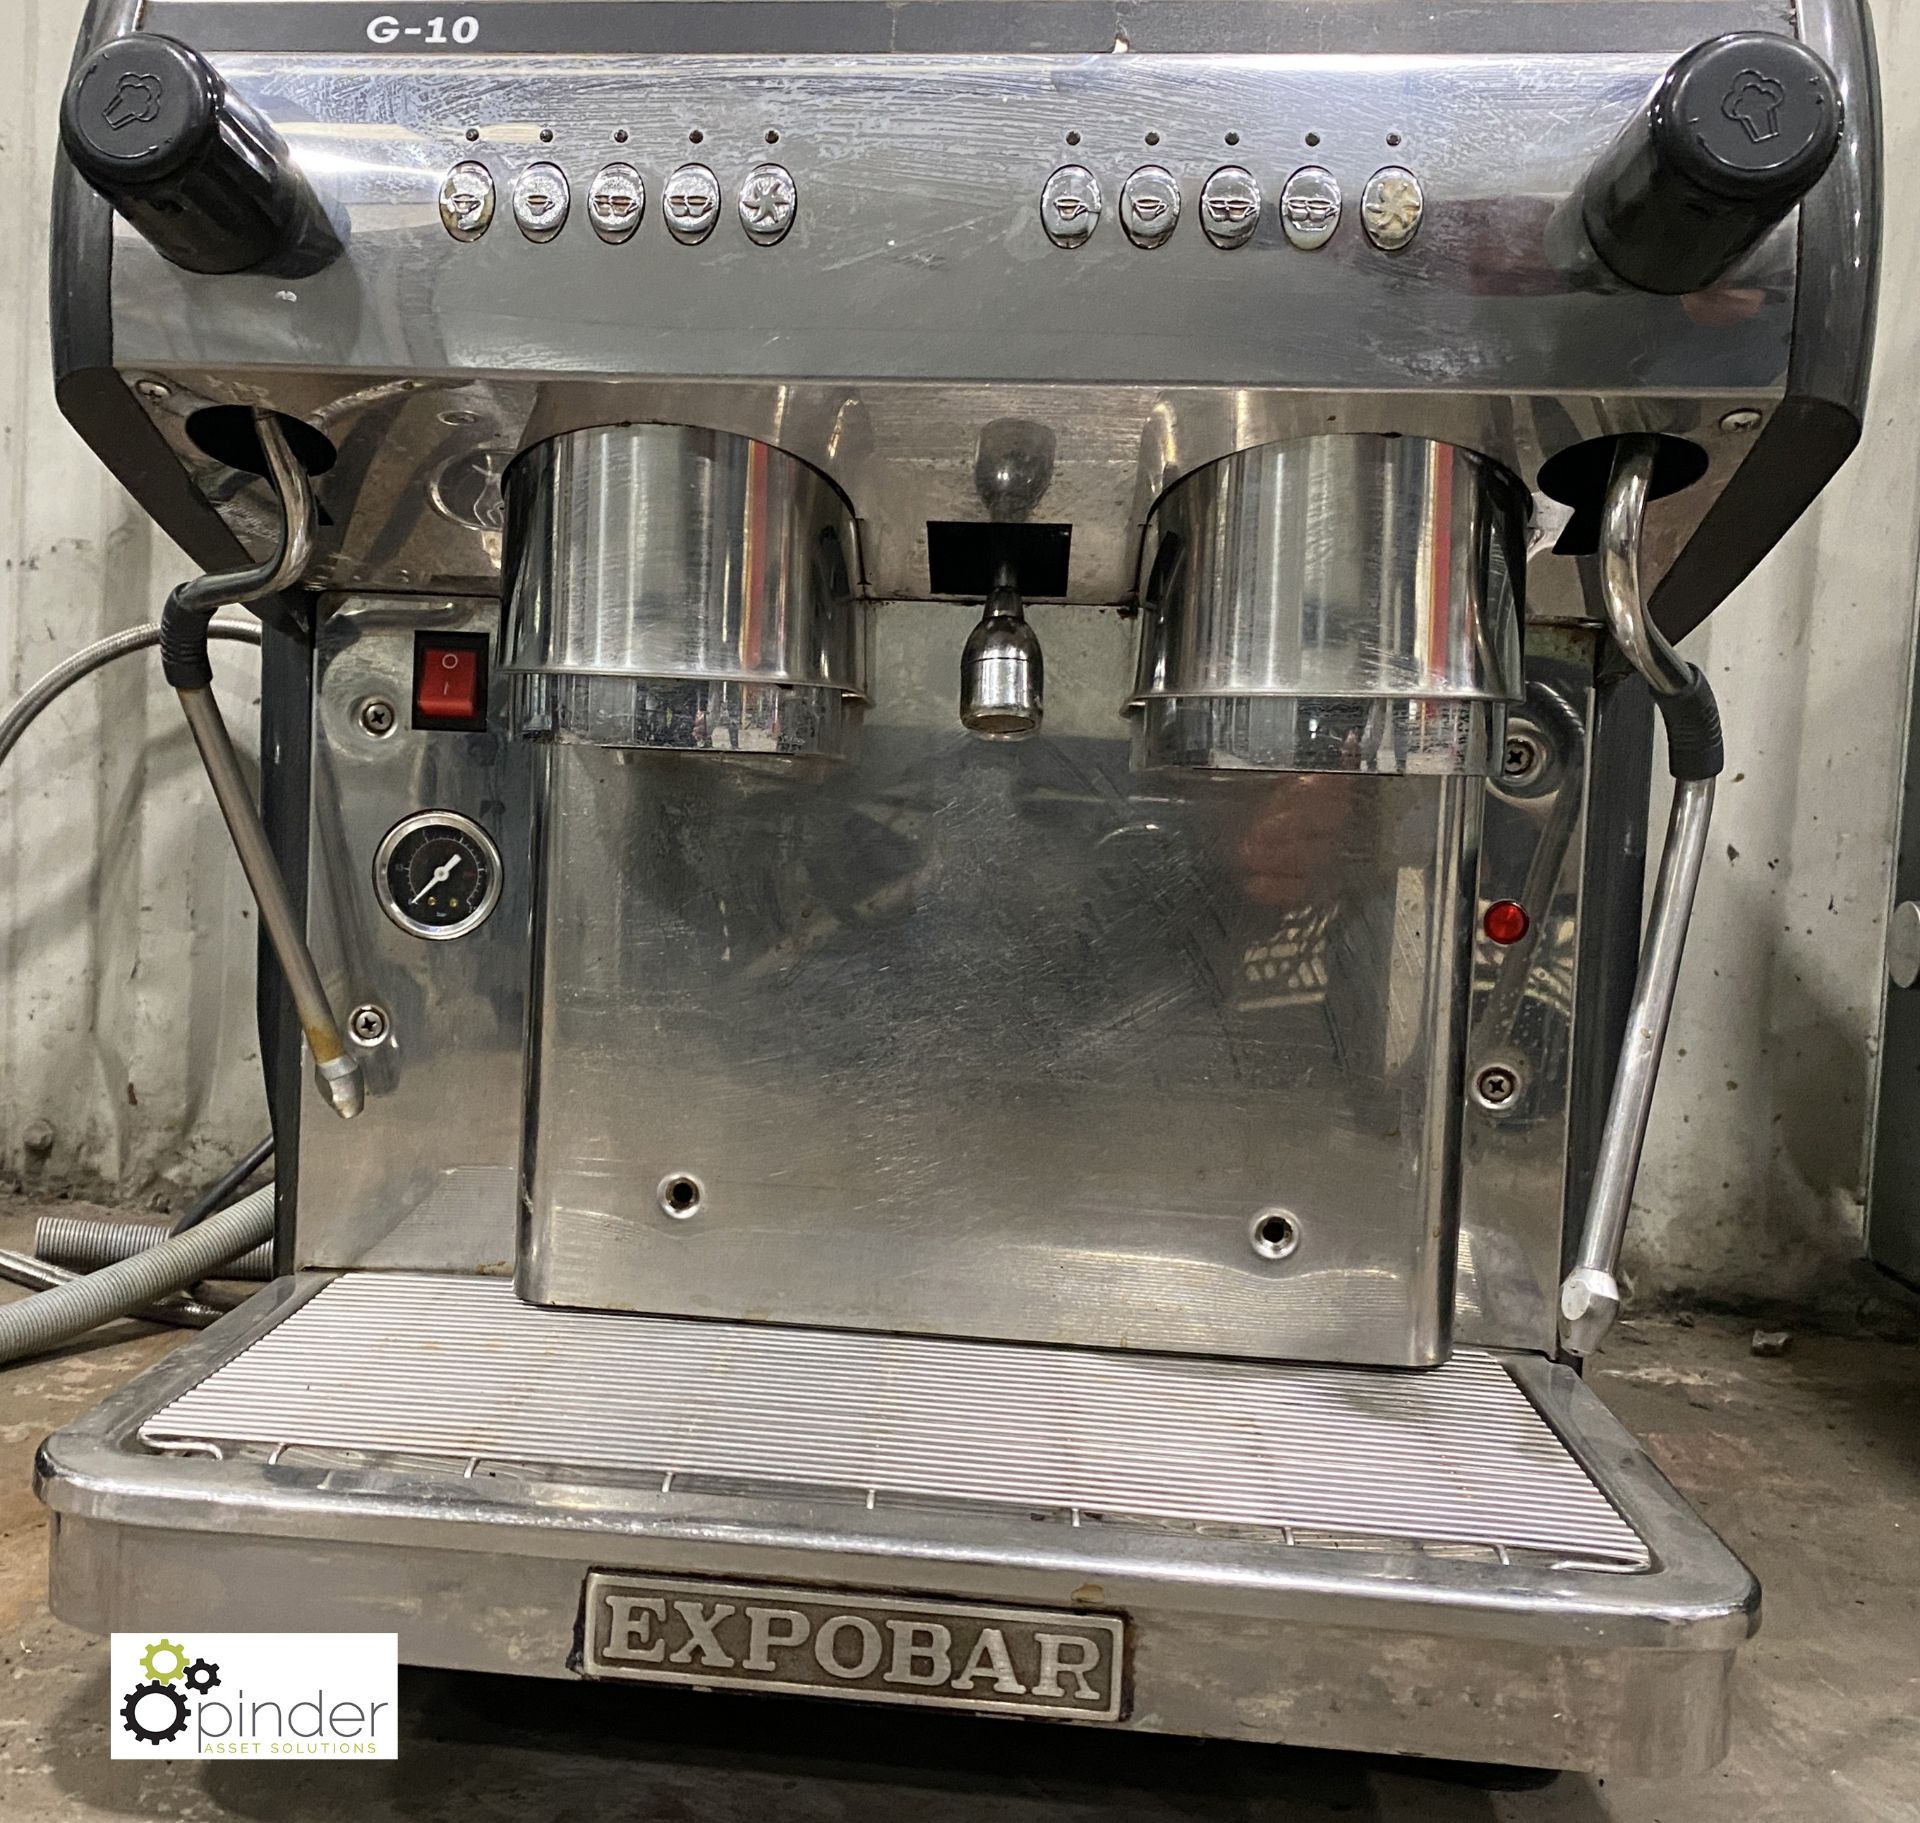 Rijo Expobar G10 Processional 2-cup Espresso Machine, 240volts (LOCATION: Hammerton Street, - Image 4 of 5